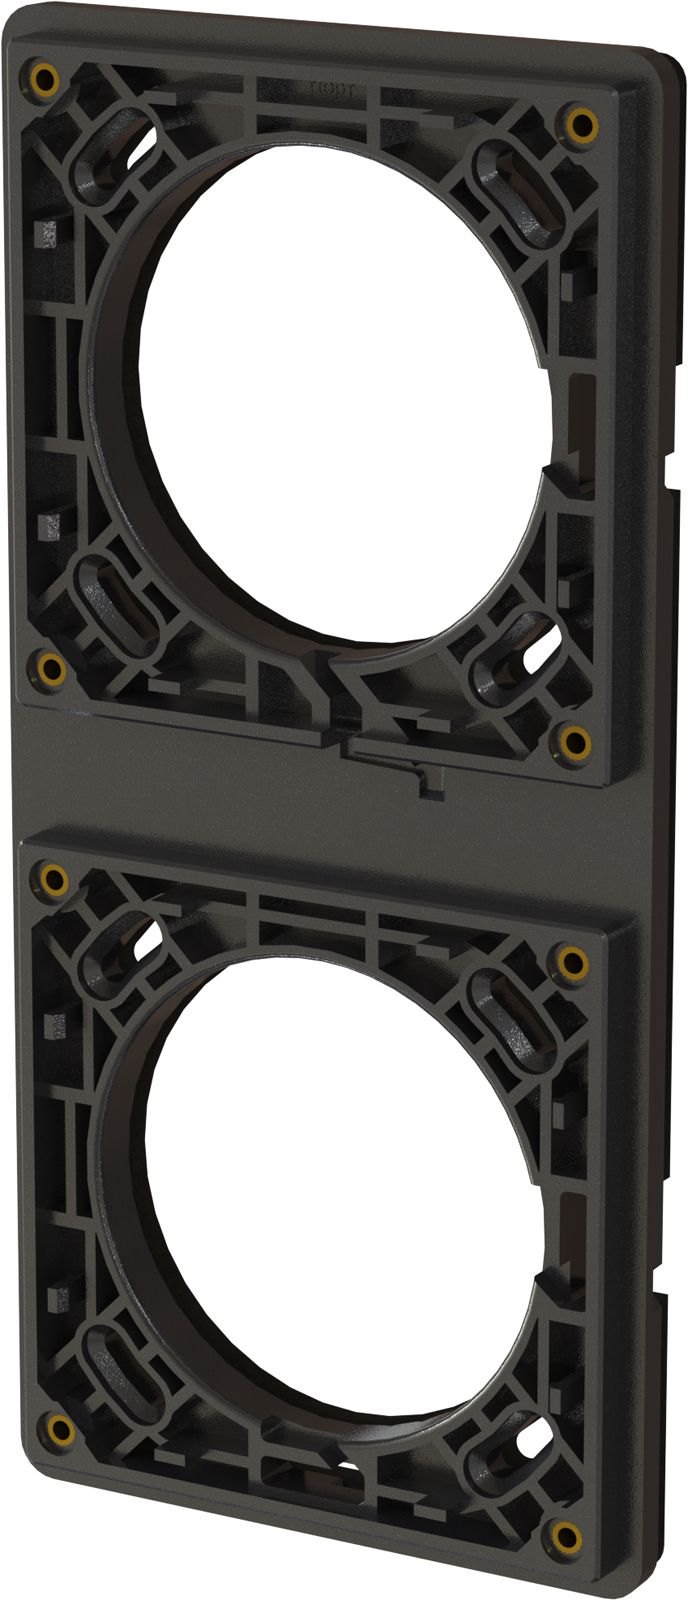 Flush frame with foam rubber seal size 1x1 exo